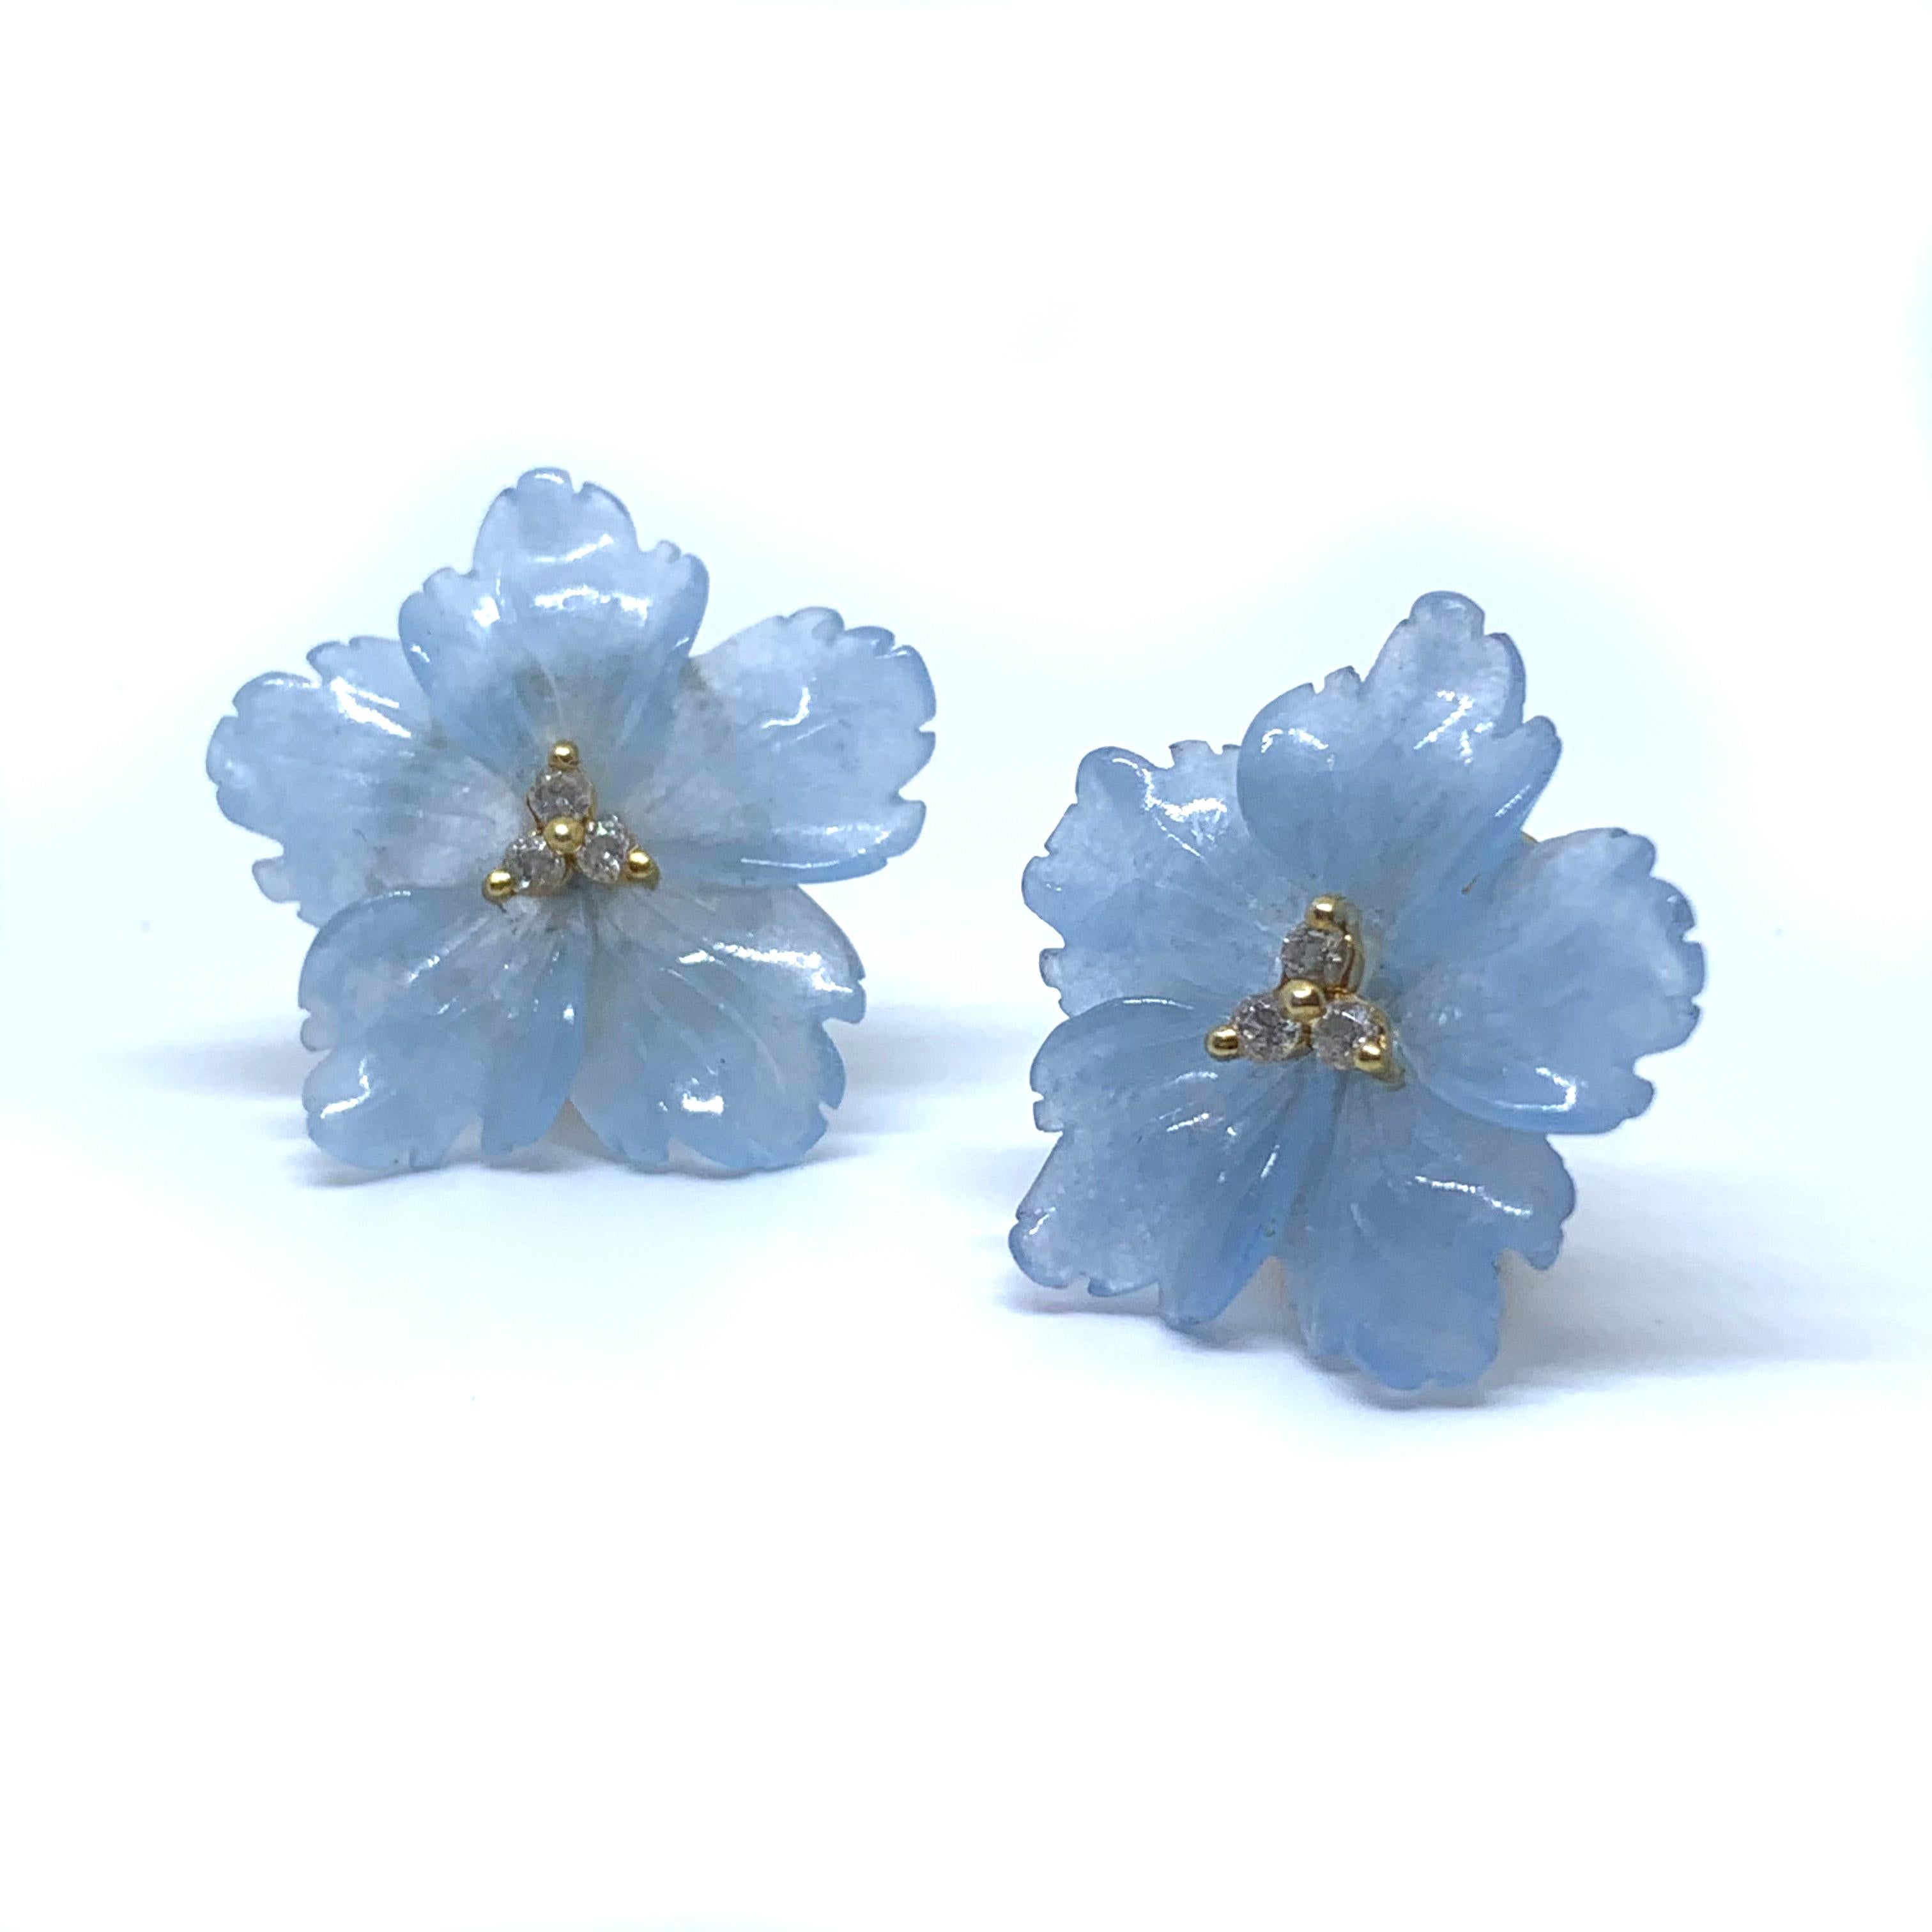 Elegant 24mm Carved Blue Quartzite Flower Vermeil Earrings

This gorgeous pair of earrings features 24mm blue quartzite carved into beautiful 3D flower, adorned with round simulated diamonds in the center, handset in 18k yellow gold vermeil over